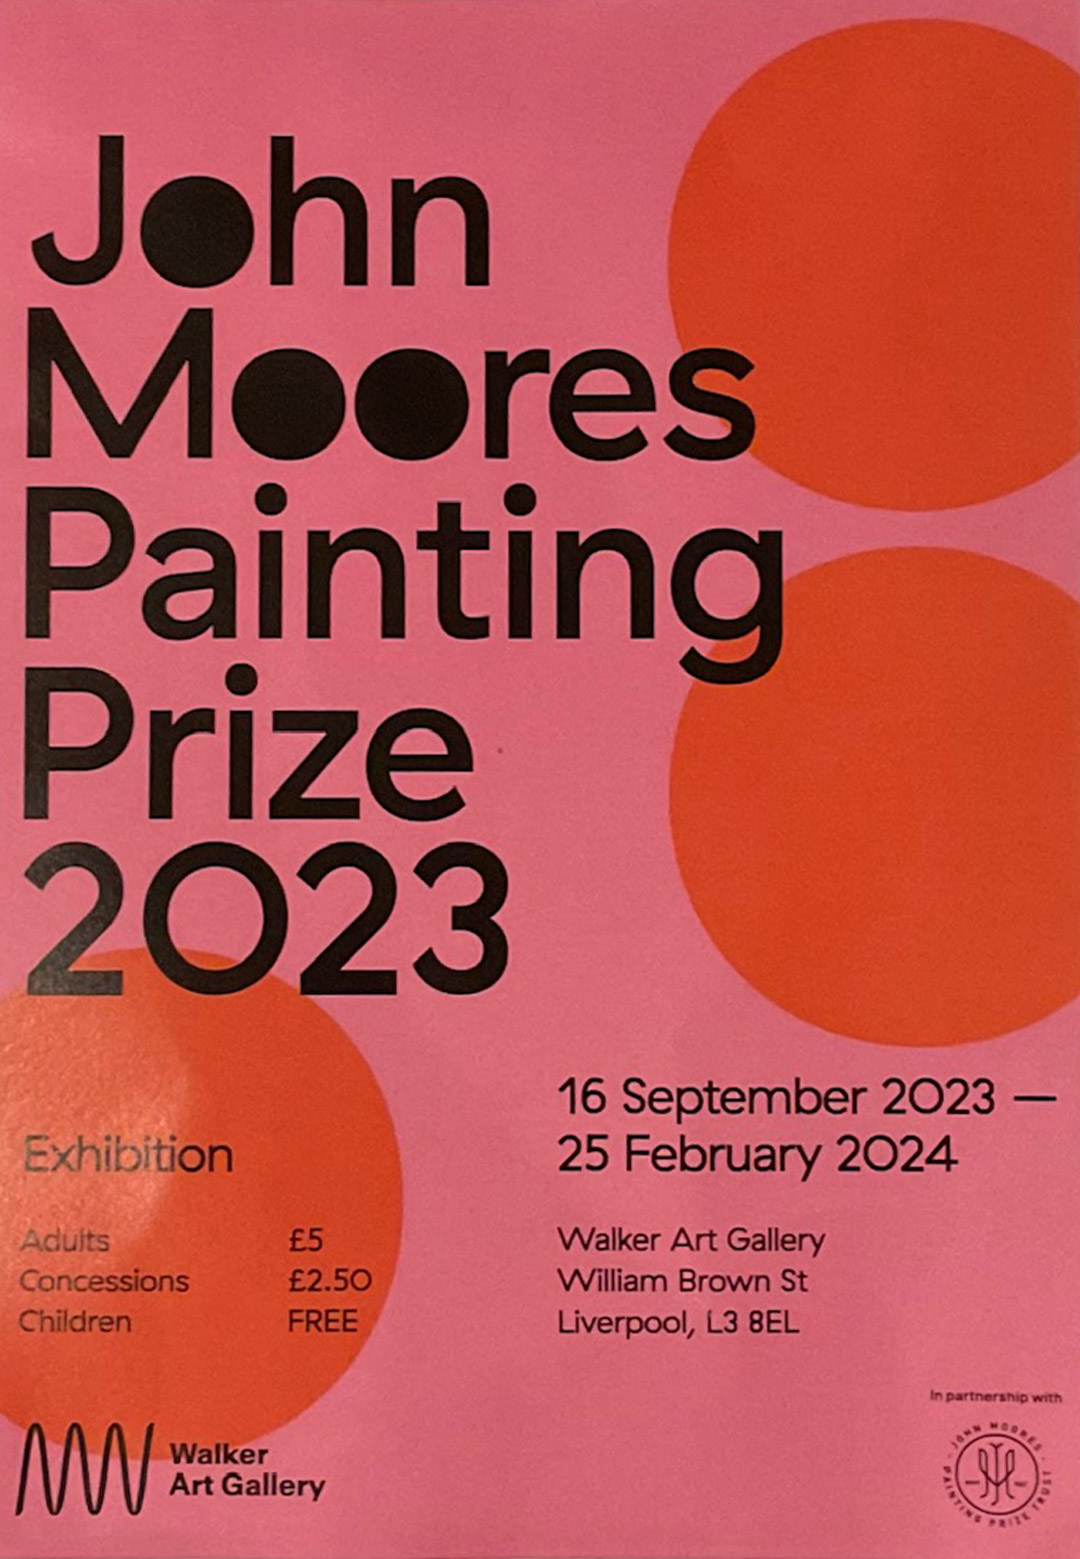 Introduction image for John Moores Painting Prize Exhibition 2023 | Walker Art Gallery, Liverpool